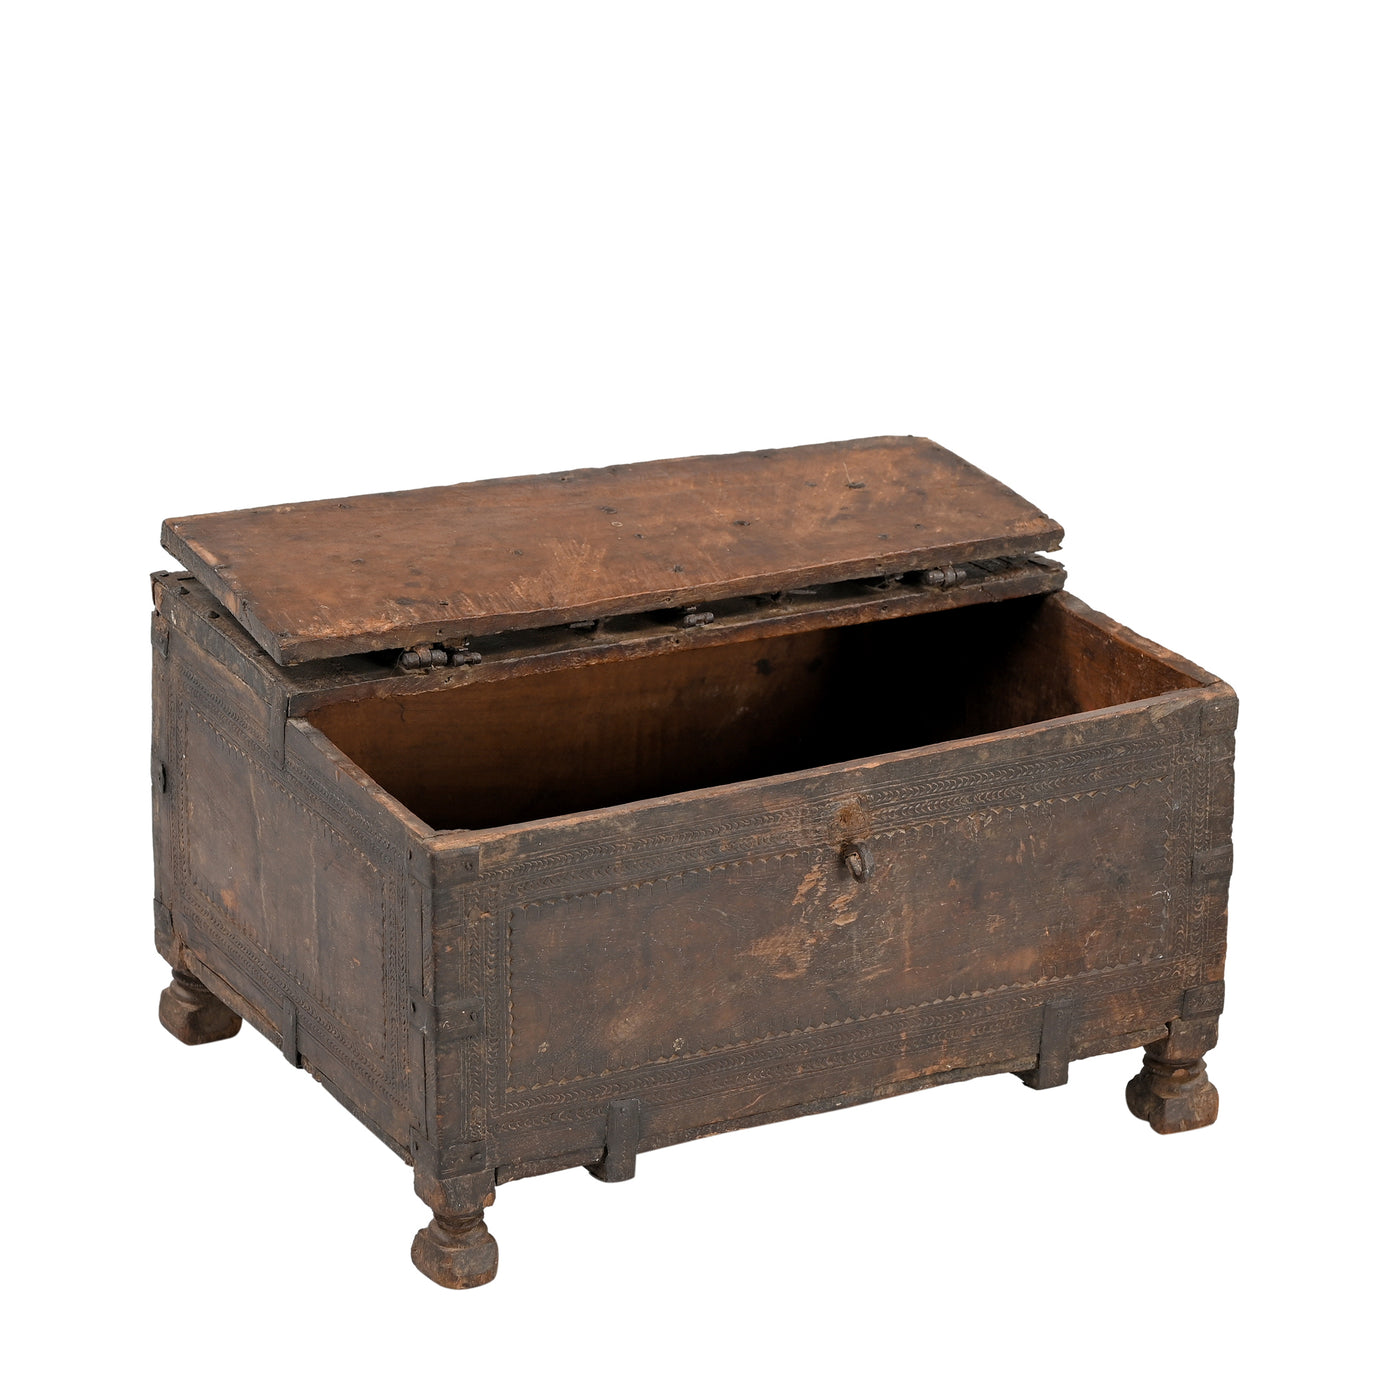 Peti - Wooden dowry chest n ° 6